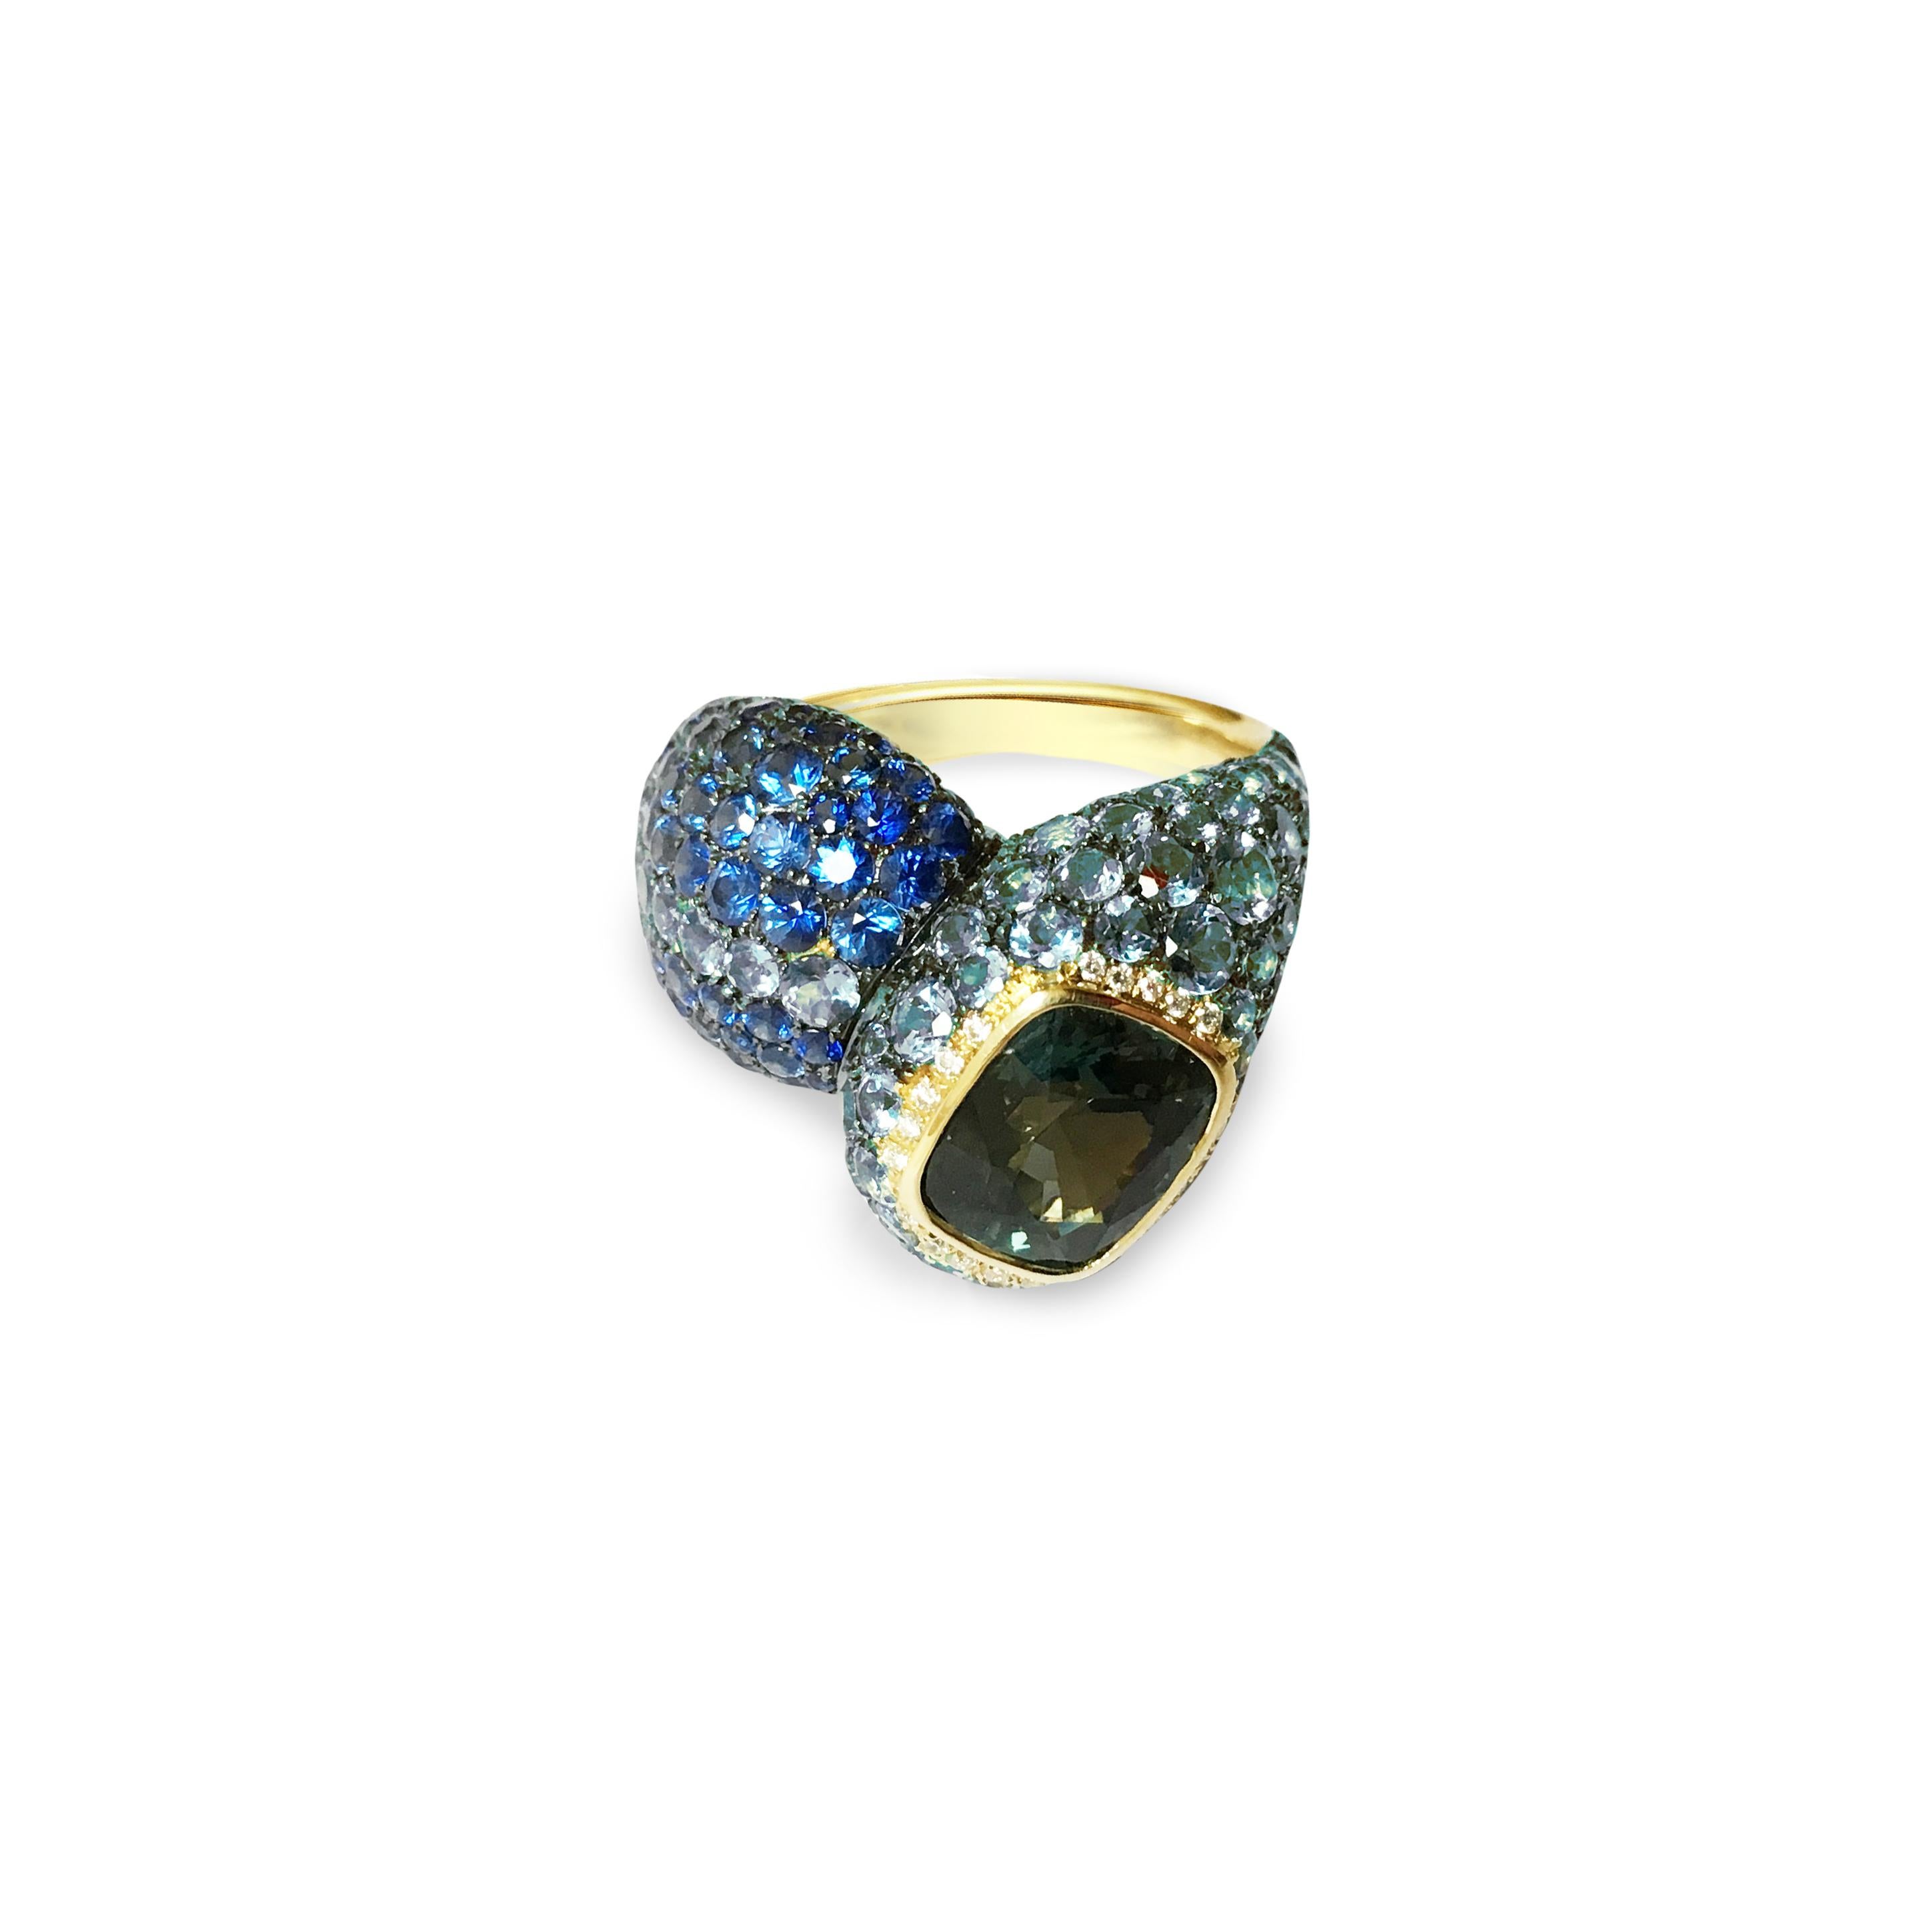 Encircling the finger in a fluid motion like an embrace, the untwisted band is expertly bejewelled with exquisite blue sapphires and aquamarines leading to an elegant rectangular green spinel, surrounded by brilliant cut diamonds.

Bluish Green